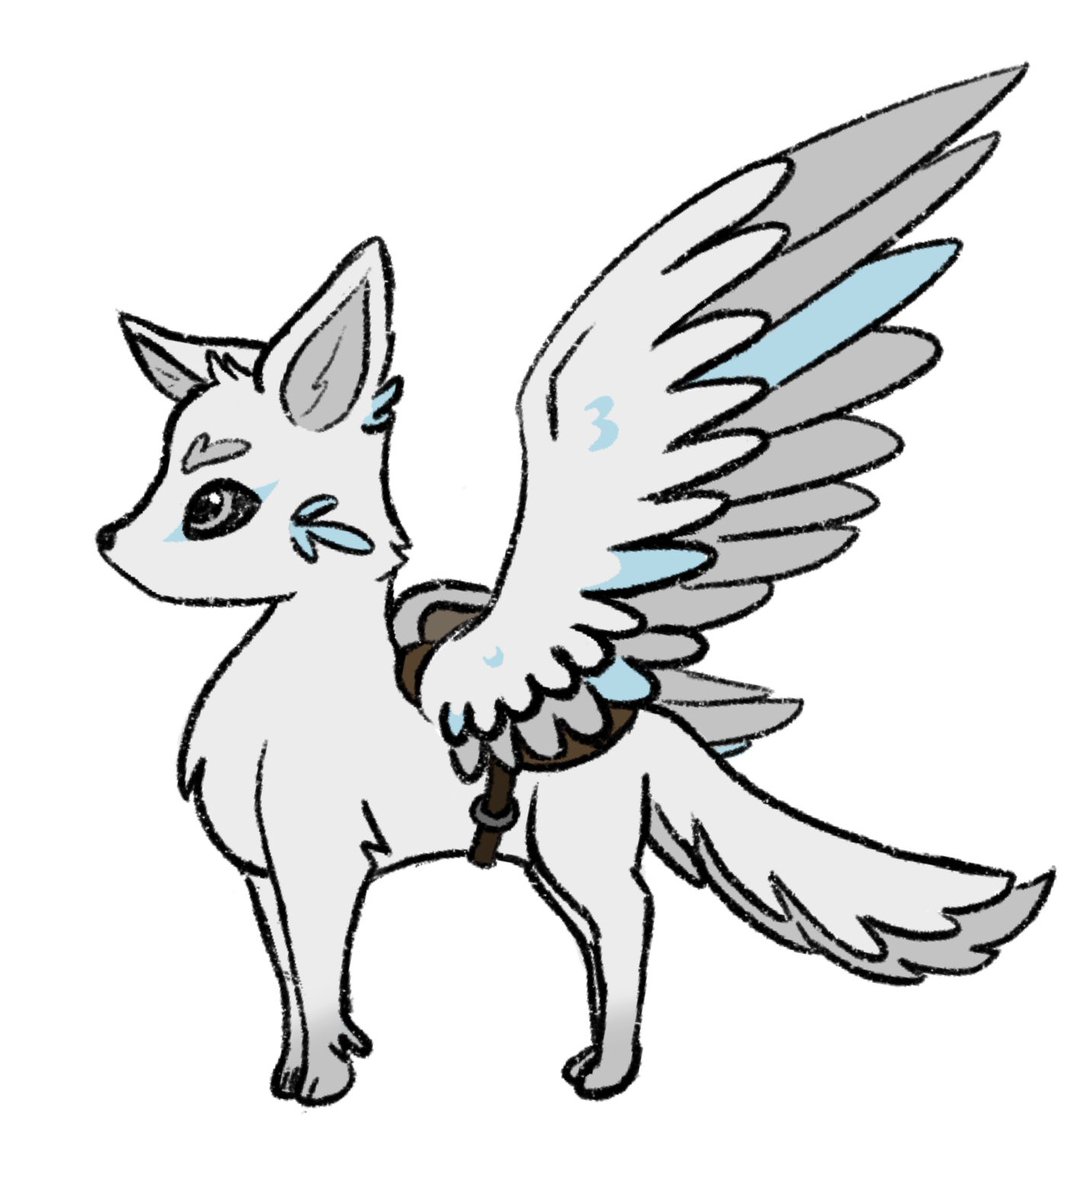 [Silver-eyed Fox was an option for a mount on the tdp primal source quiz]Silver-eyed Fox HCs:- Only Earthblood mounts with wings- They can locate silver and other rare metals deep underground from above the surface- They can be trained to locate metals used for crafting